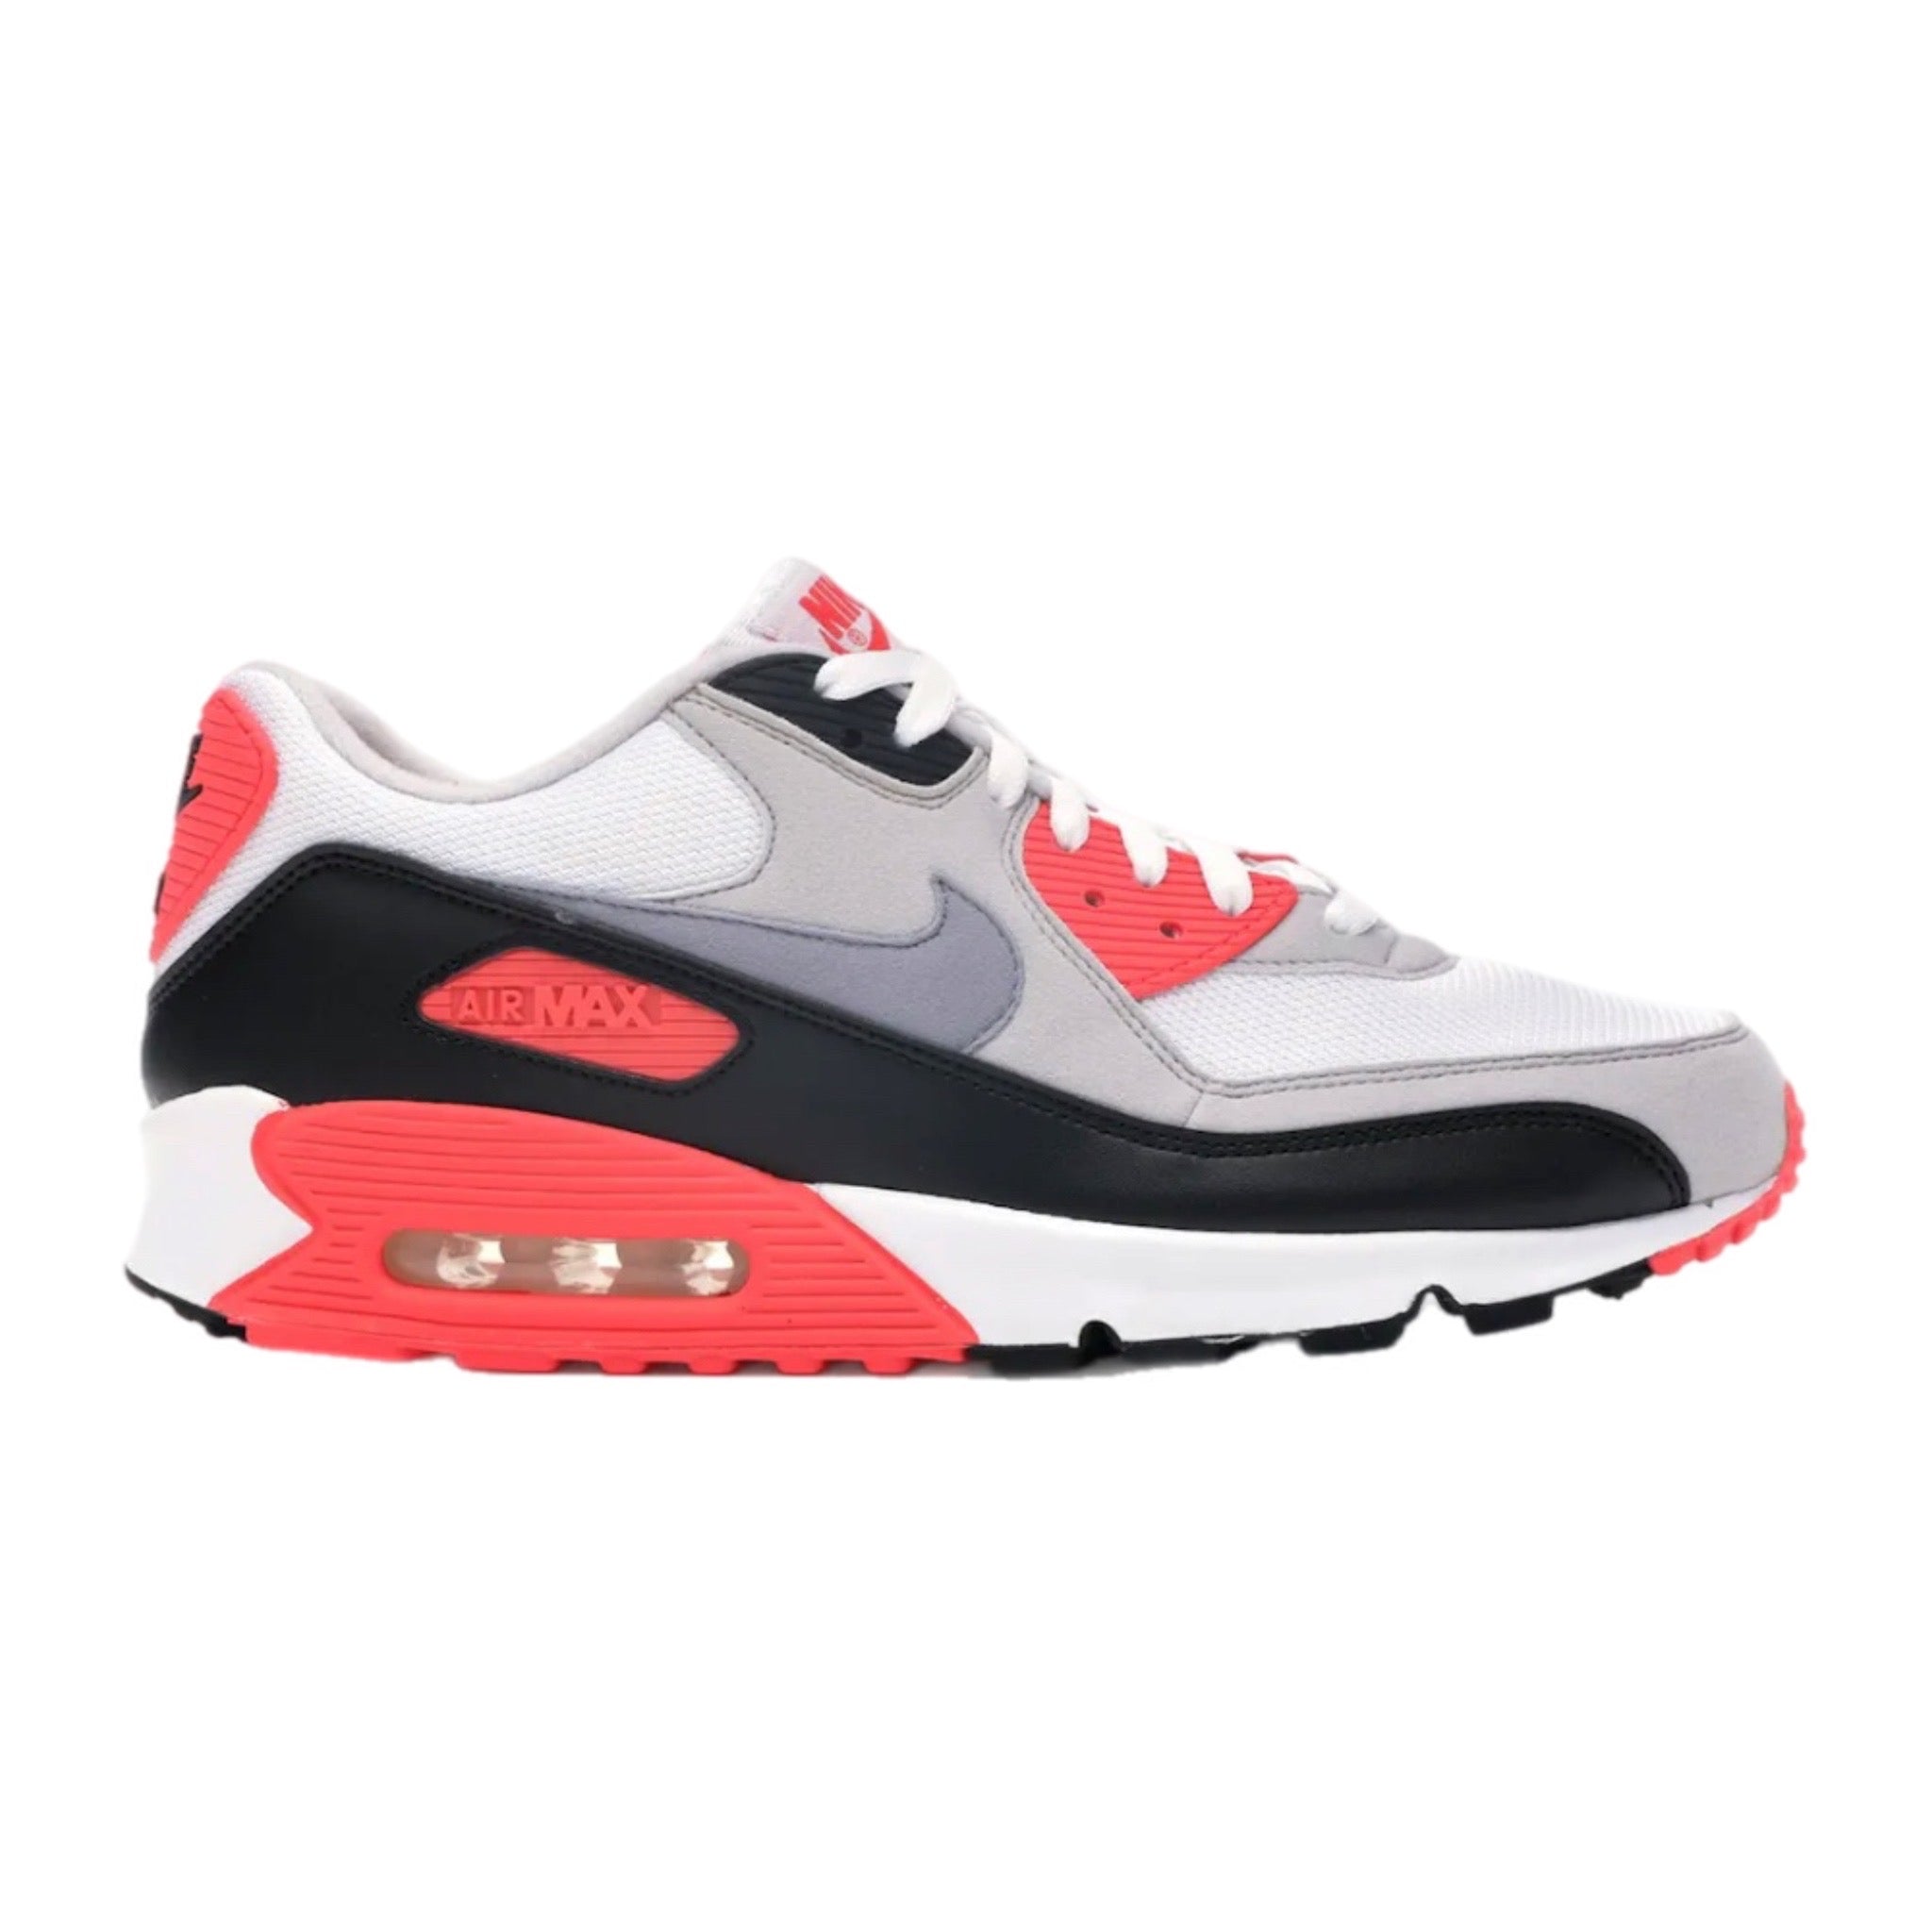 Nike Air Max 90 Infrared (2010) (Used)